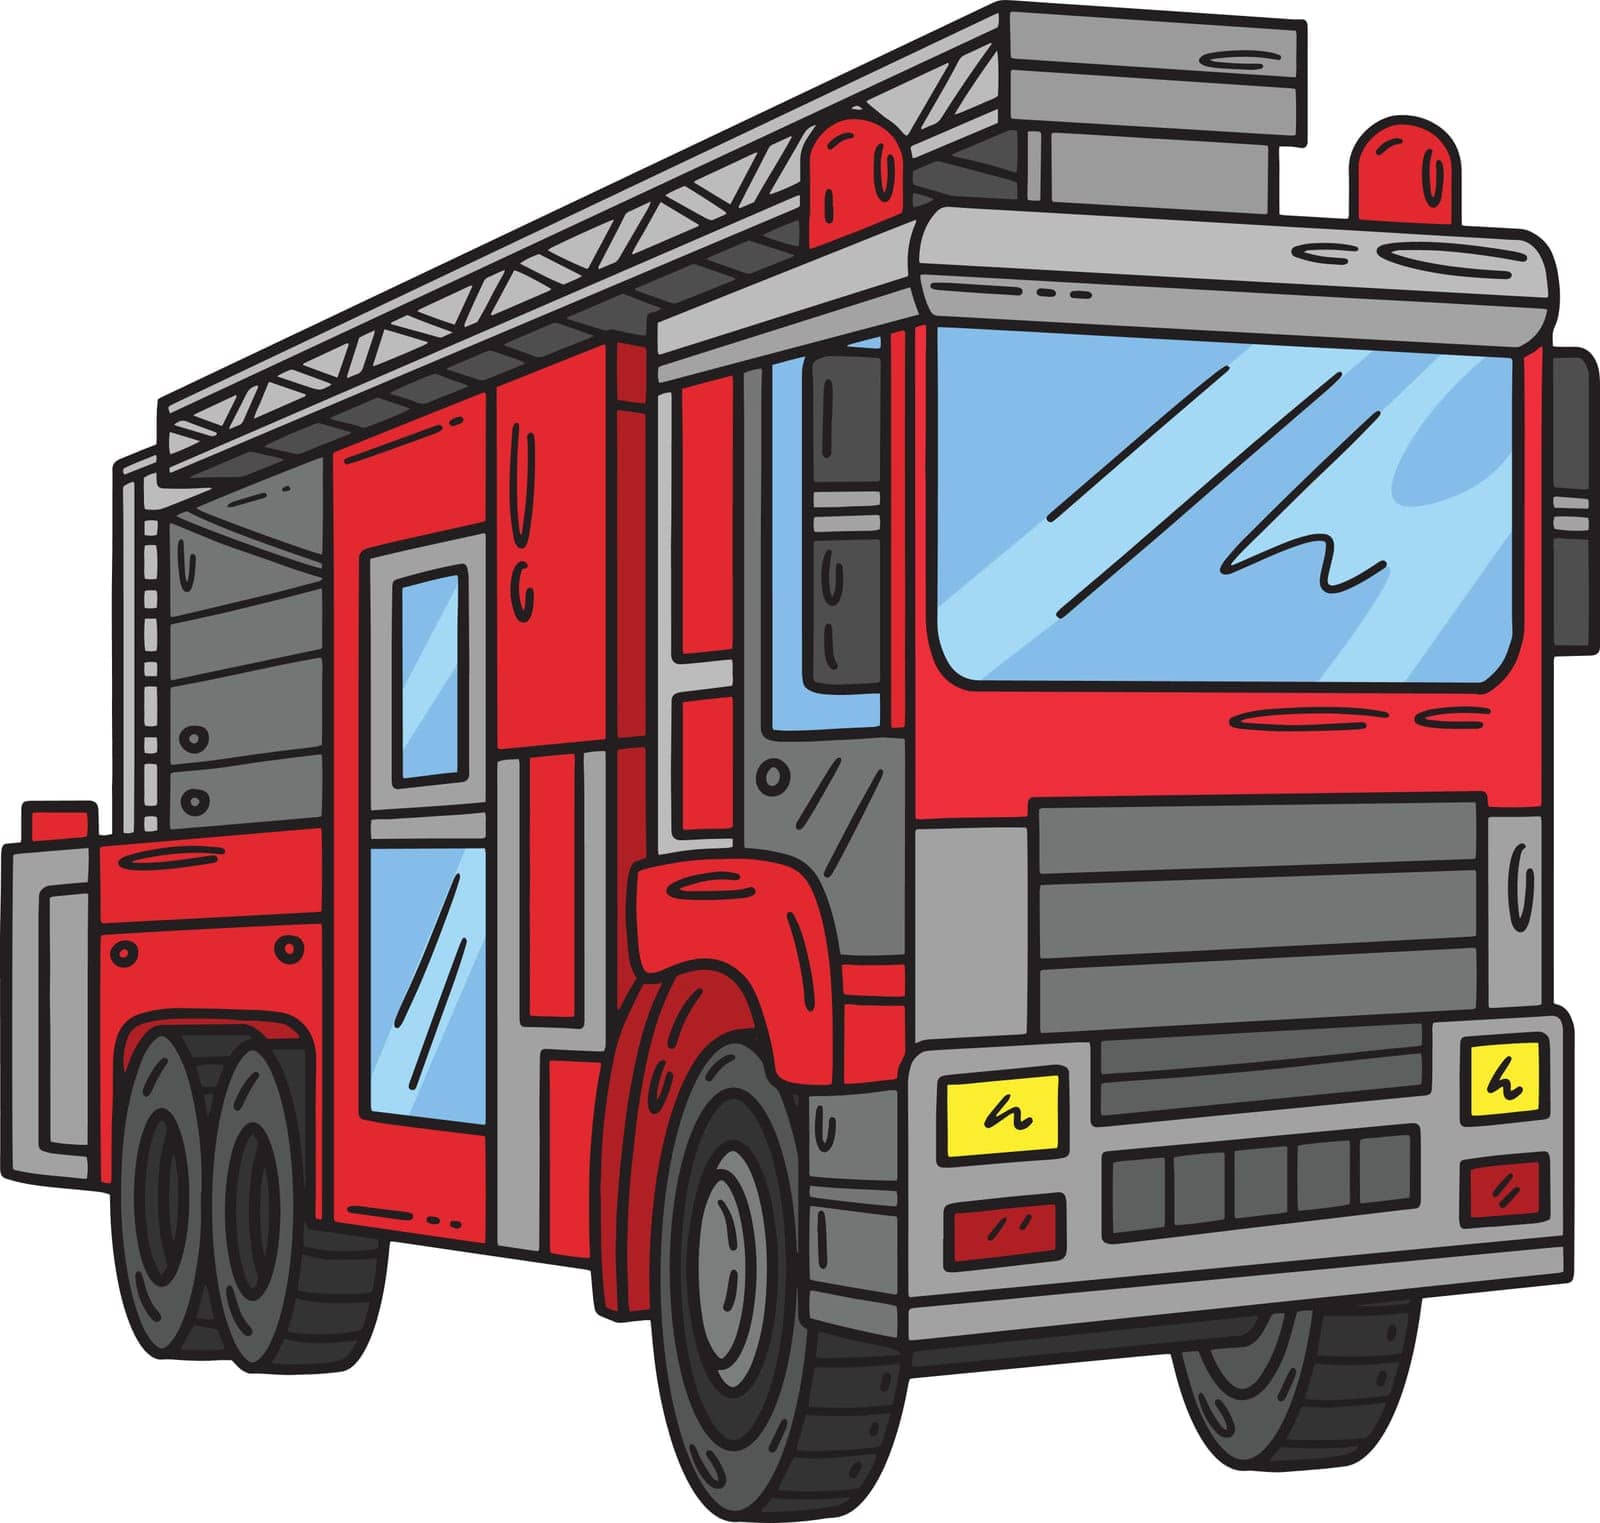 Firefighter Truck Cartoon Colored Clipart by abbydesign